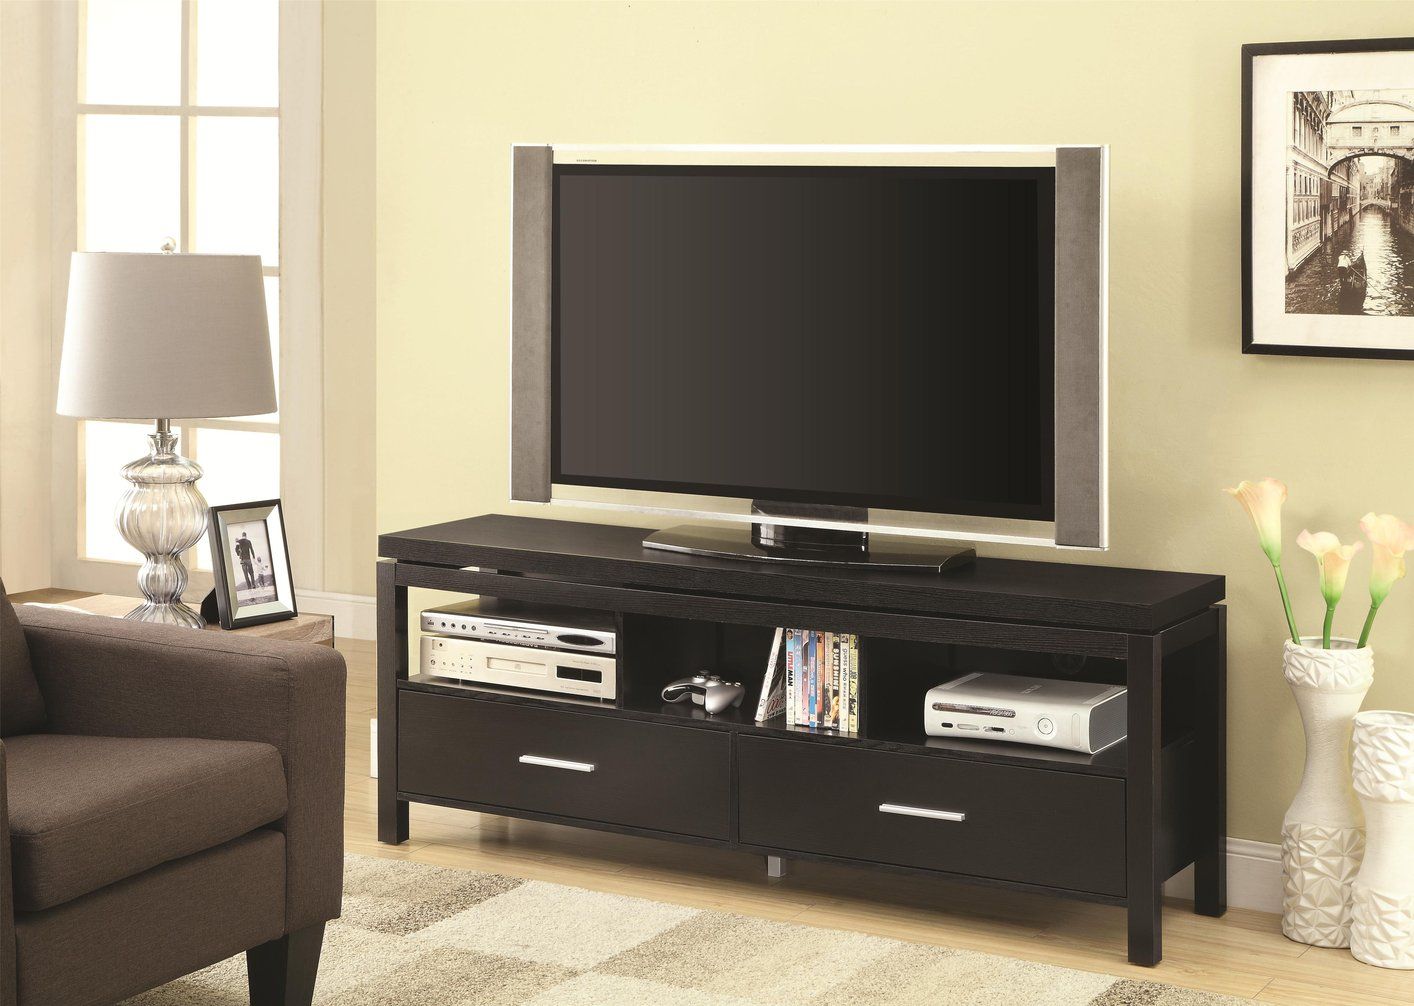 Black Wood Tv Stand – Steal A Sofa Furniture Outlet Los Intended For Opod Tv Stand Black (View 7 of 15)